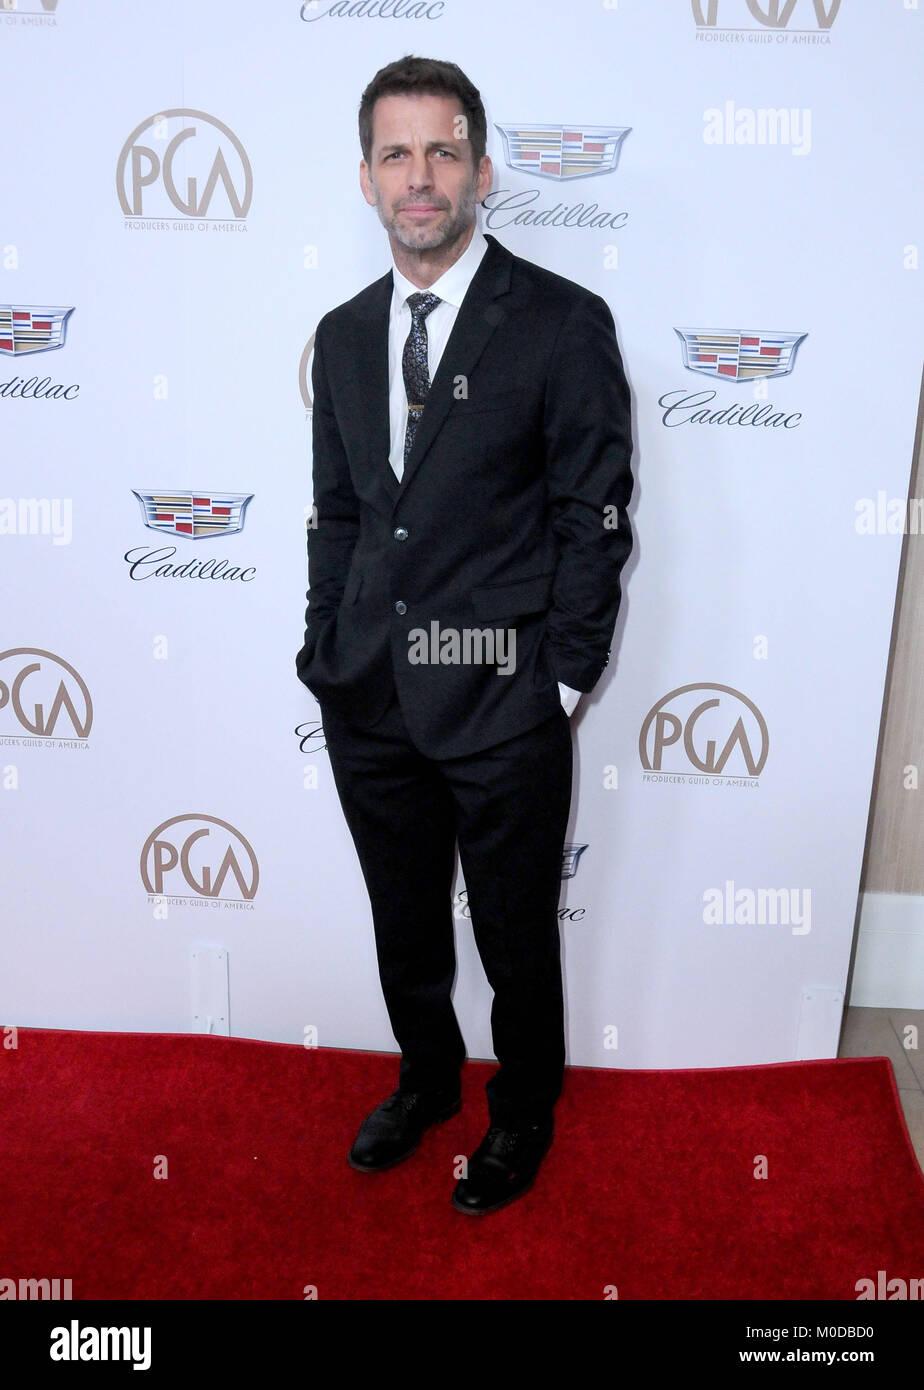 BEVERLY HILLS, CA - JANUARY 20: Director Zack Snyder attends the 2018 Annual Producers Guild Awards at the Beverly Hilton Hotel on January 20, 2018 in Beverly Hills, California. Photo by Barry King/Alamy Live News Stock Photo